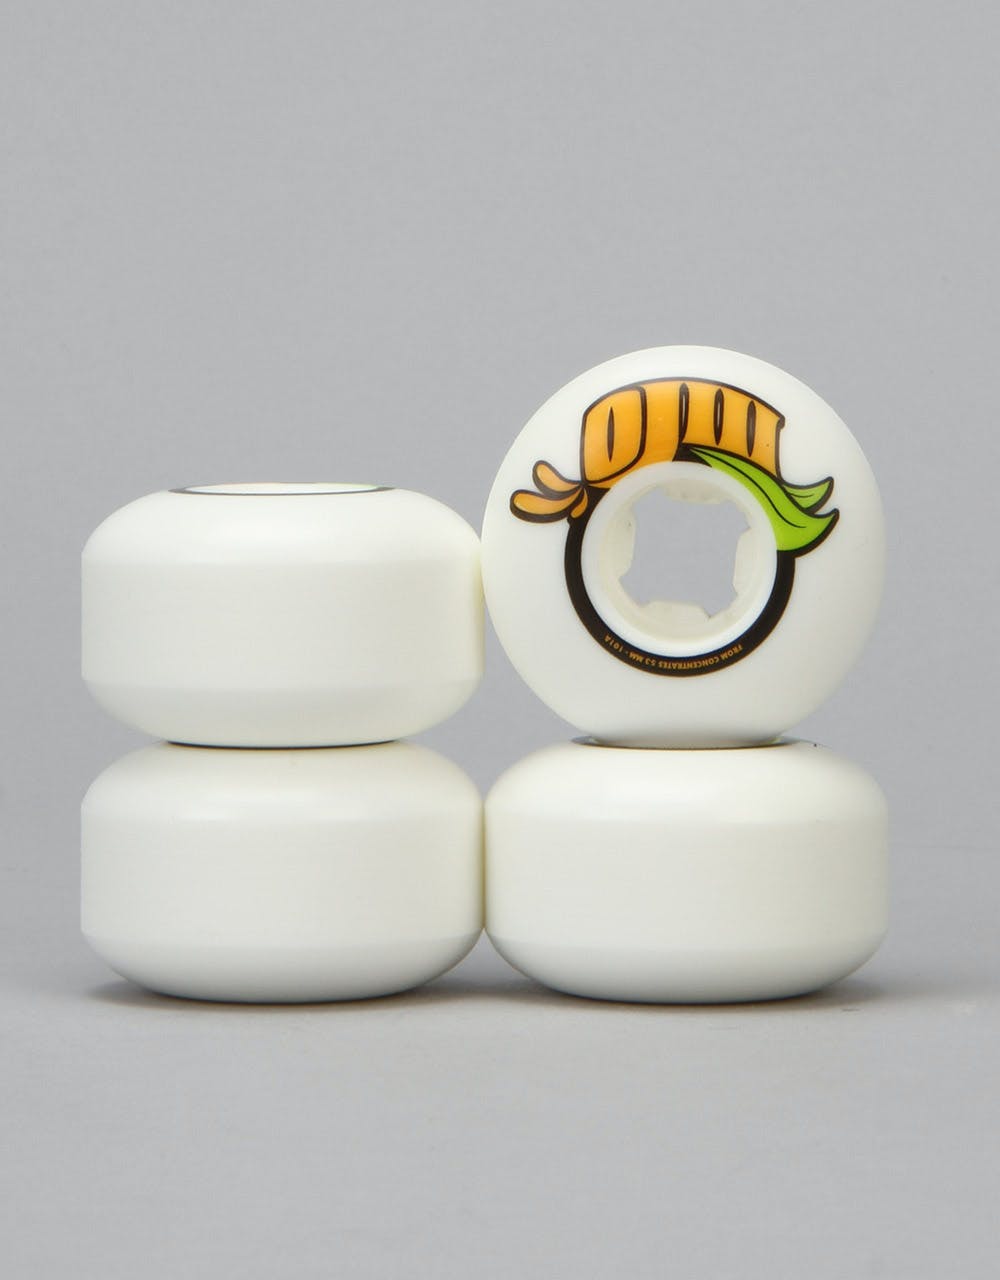 OJ From Concentrate 101a Team Wheel - 52mm